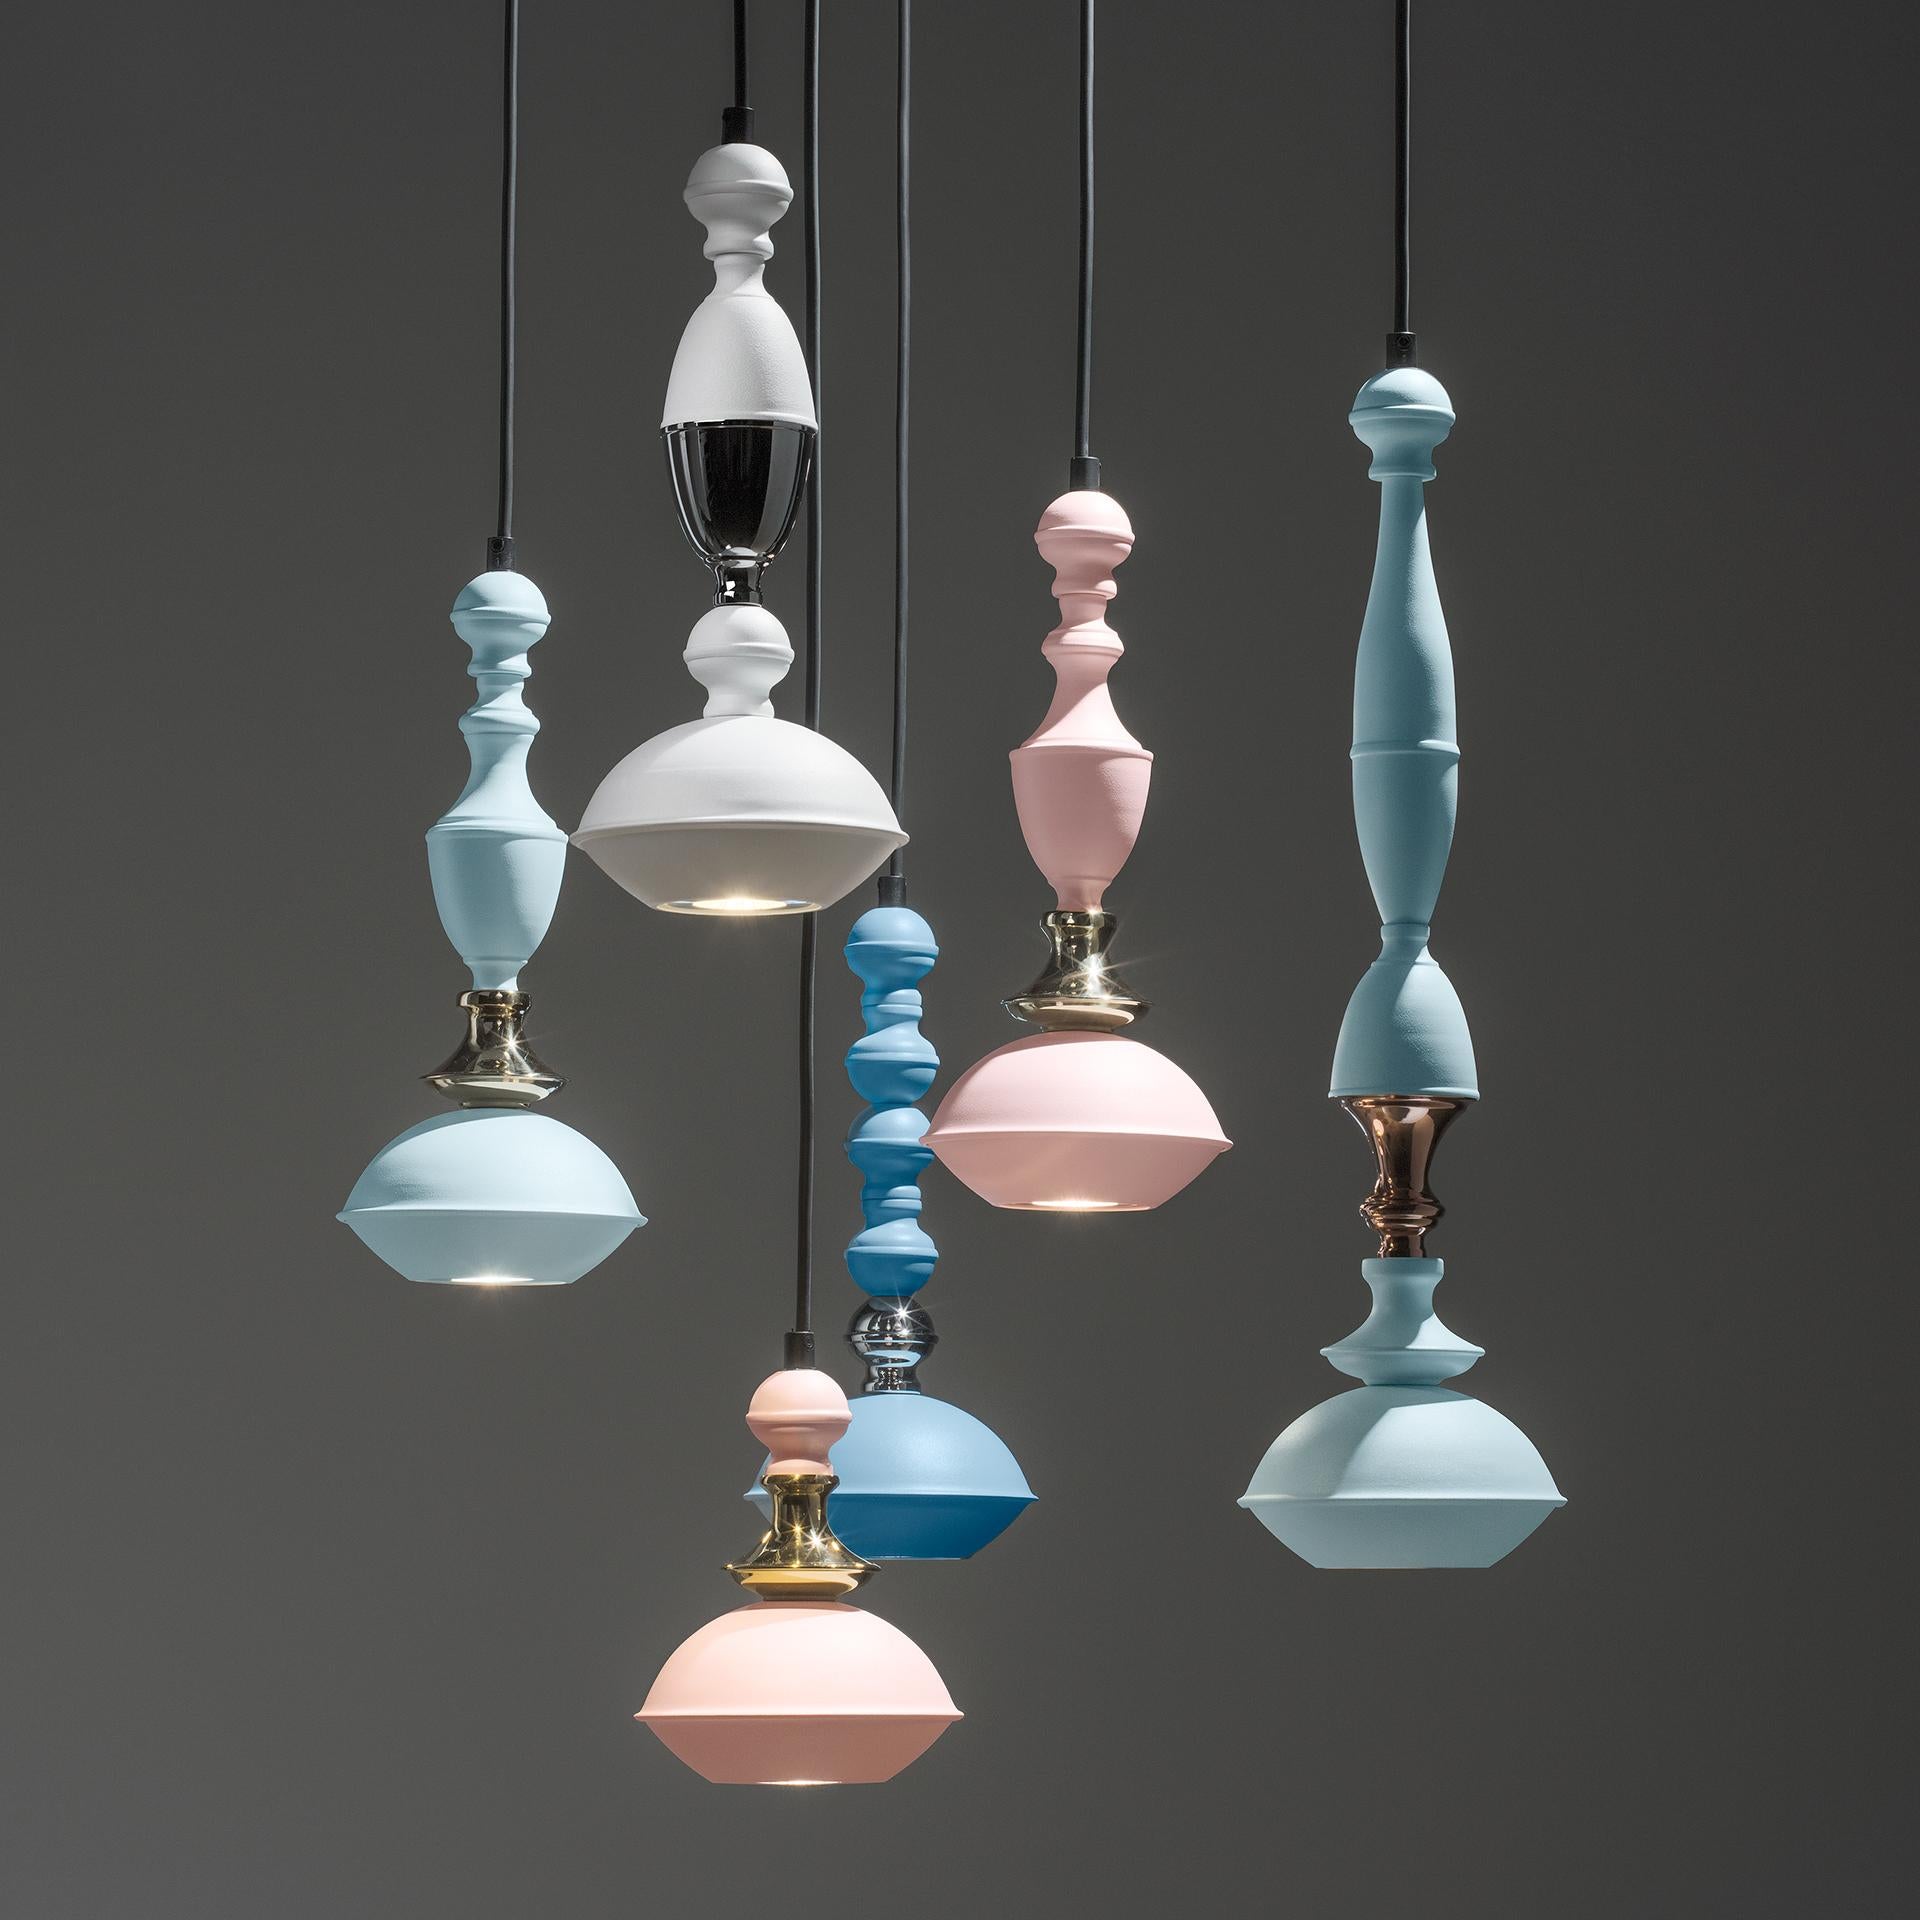 When French interior designer Florence Deau featured Jacco Maris’ new Benben pendant on her blog FLODEAU, she copped to having an “absolute crush on the finishes, the graceful forms and the beautiful pastel tones.” Maris says of his design, which he